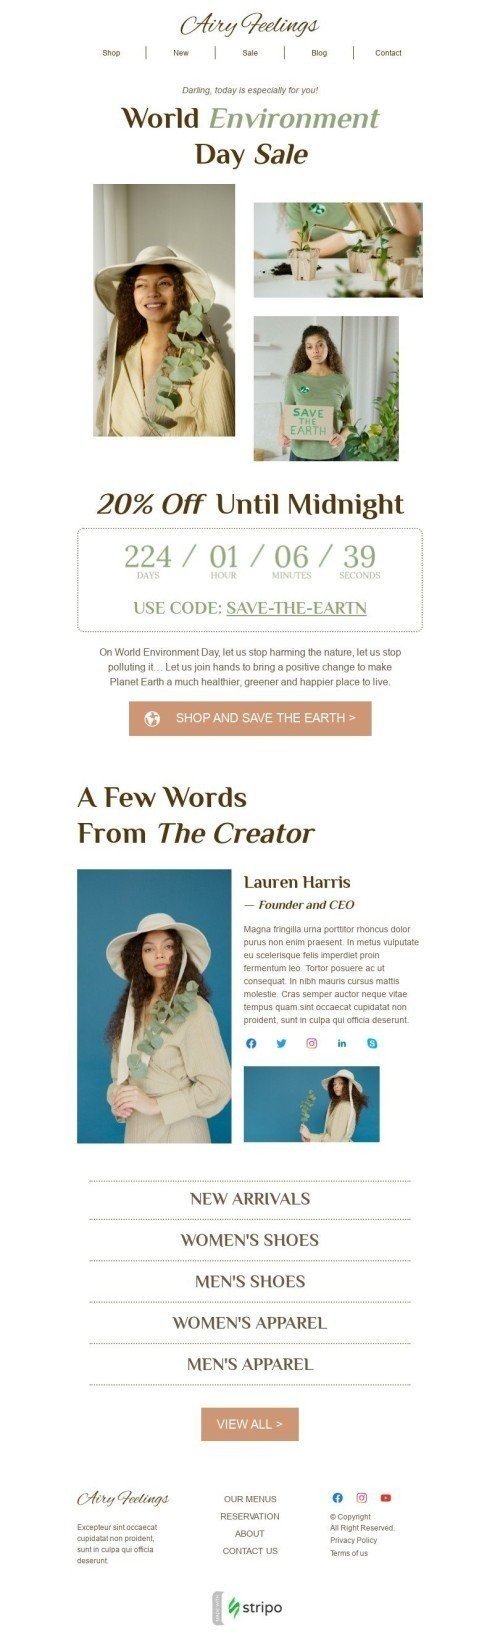 World Environment Day Email Template "Stop harming nature" for Fashion industry mobile view